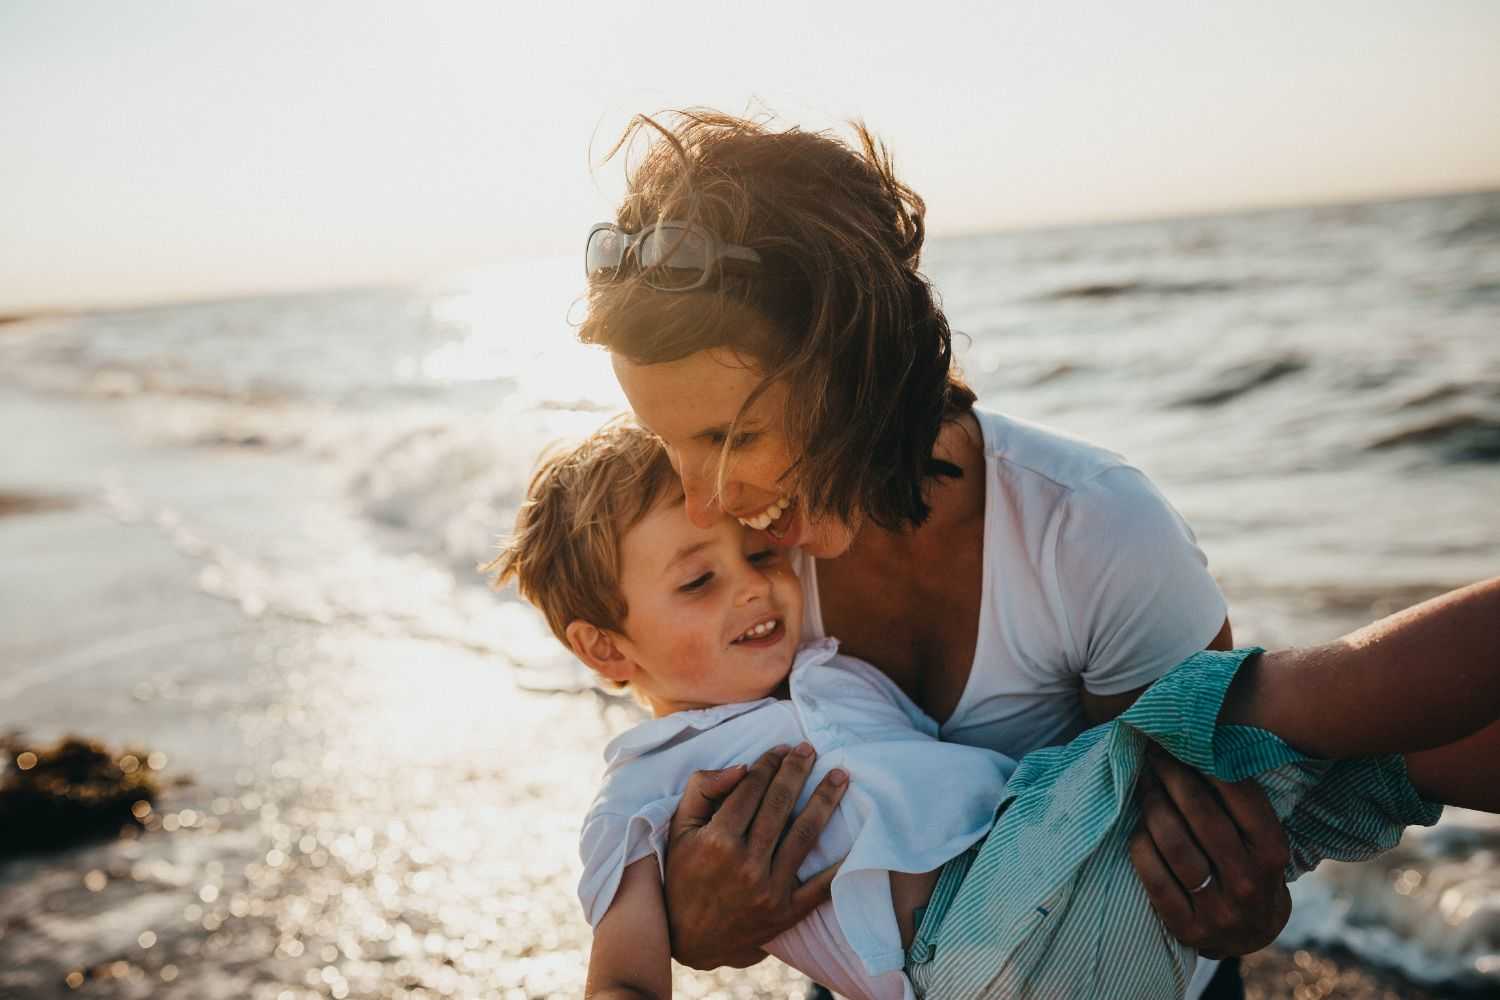 Mom is holding the child by the beach Photo by Xavier Mouton Photographie on unsplash